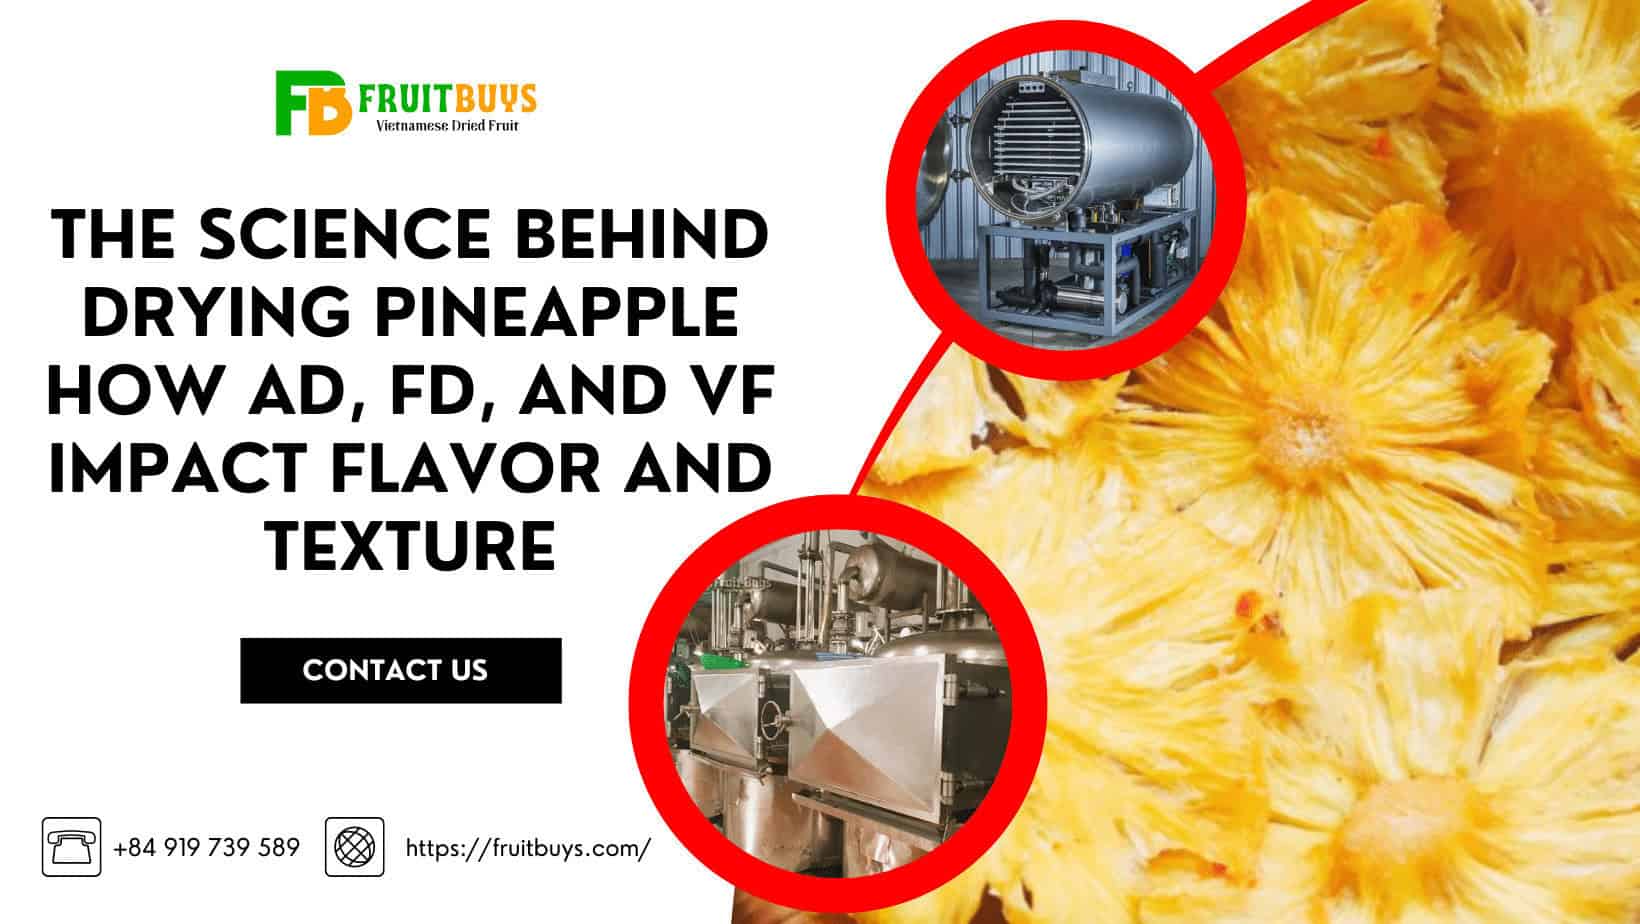 FruitBuys Vietnam  The Science Behind Drying Pineapple How AD, FD, And VF Impact Flavor And Texture